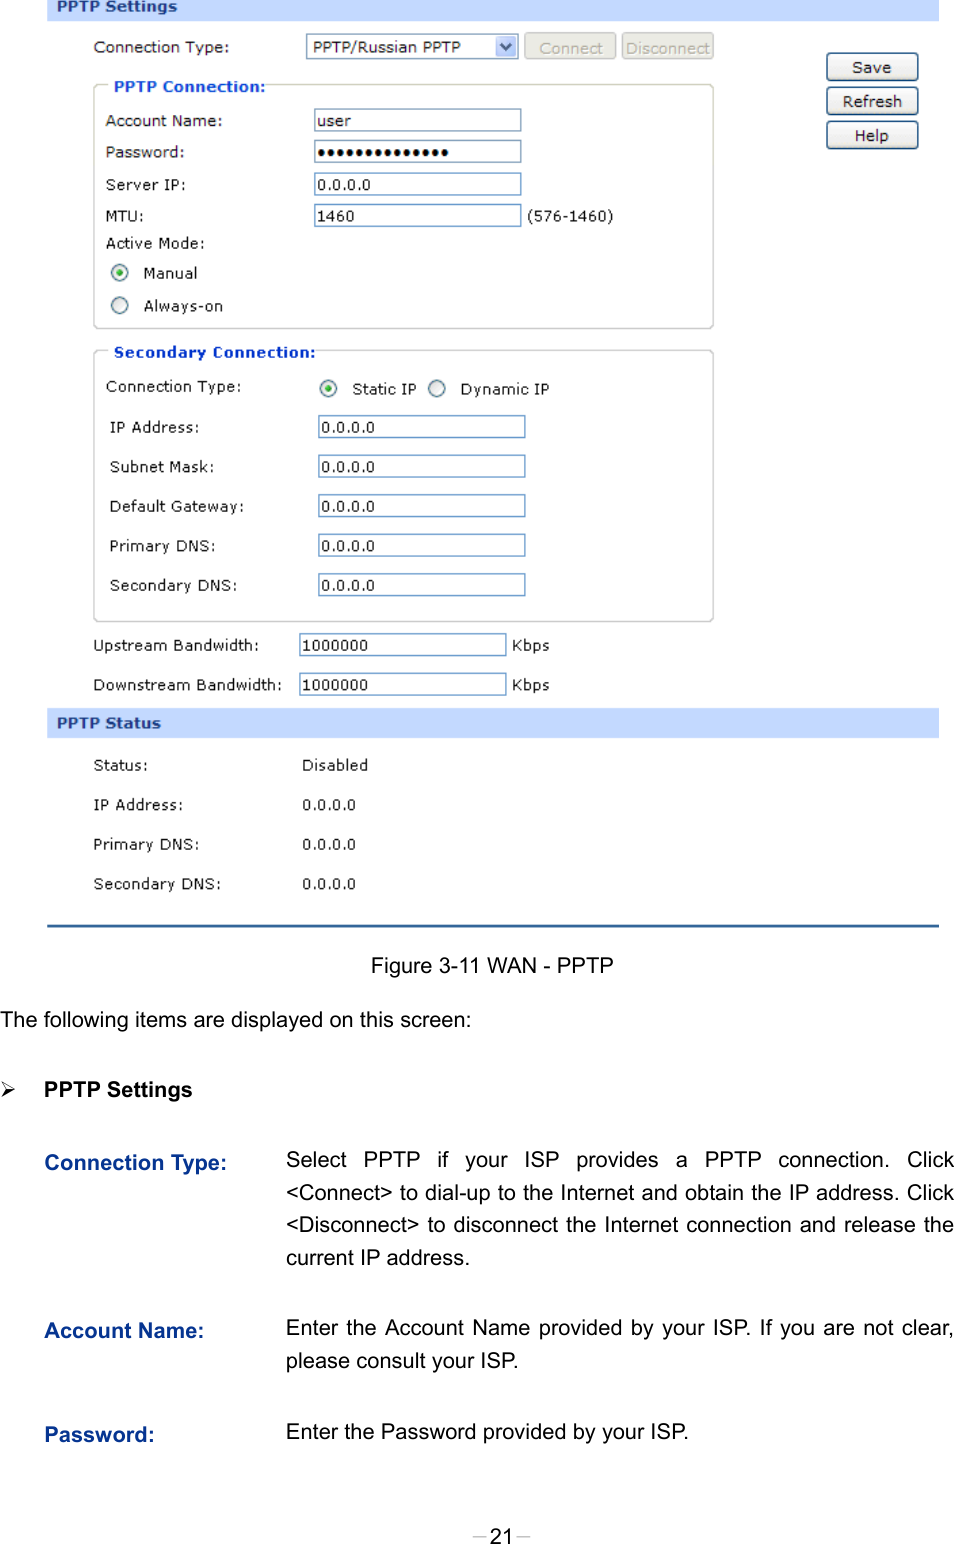   Figure 3-11 WAN - PPTP The following items are displayed on this screen:  PPTP Settings   Connection Type: Select PPTP if your ISP provides a PPTP connection. Click &lt;Connect&gt; to dial-up to the Internet and obtain the IP address. Click &lt;Disconnect&gt; to disconnect the Internet connection and release the current IP address.   Account Name:  Enter the Account Name provided by your ISP. If you are not clear, please consult your ISP. Password:  Enter the Password provided by your ISP. -21- 